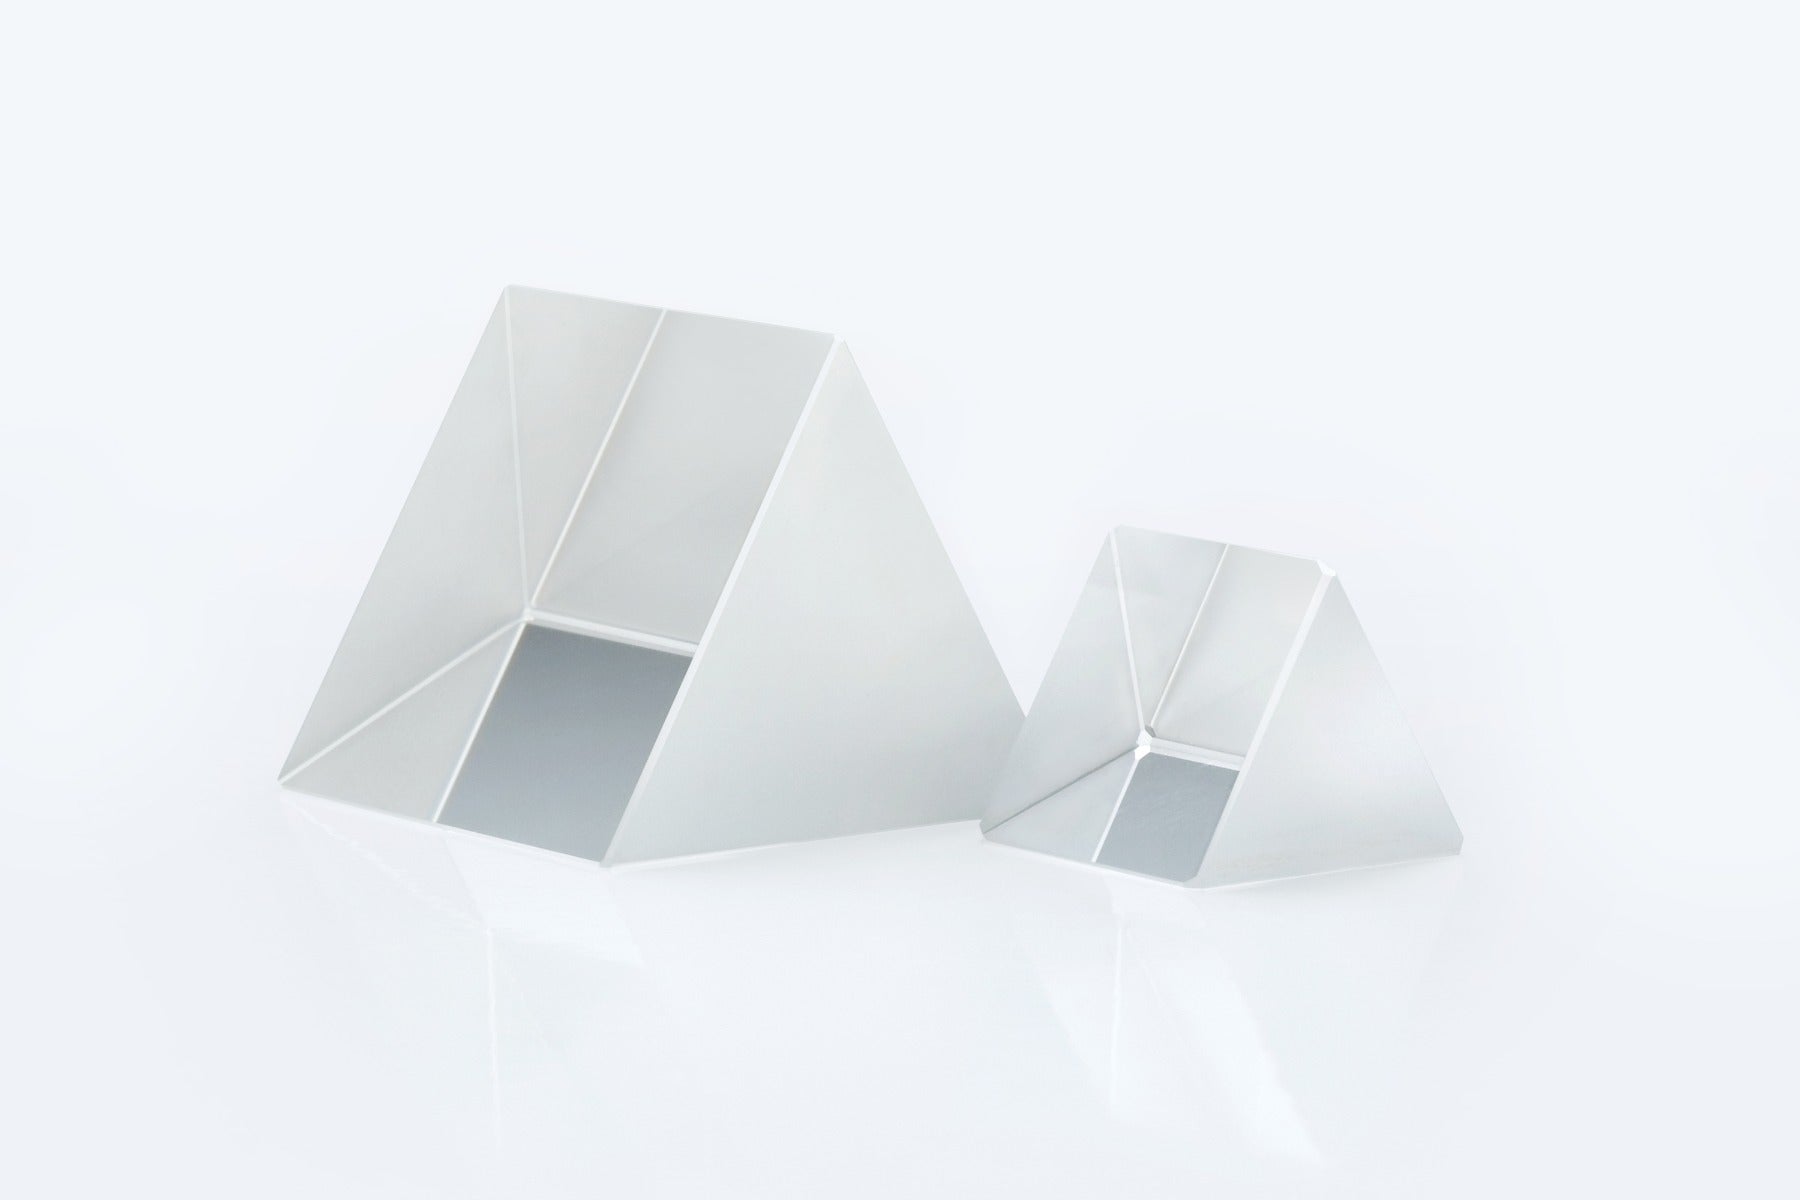 PEG6001-XS-Equilateral prism  60x60x60, NSF11 or equiv.